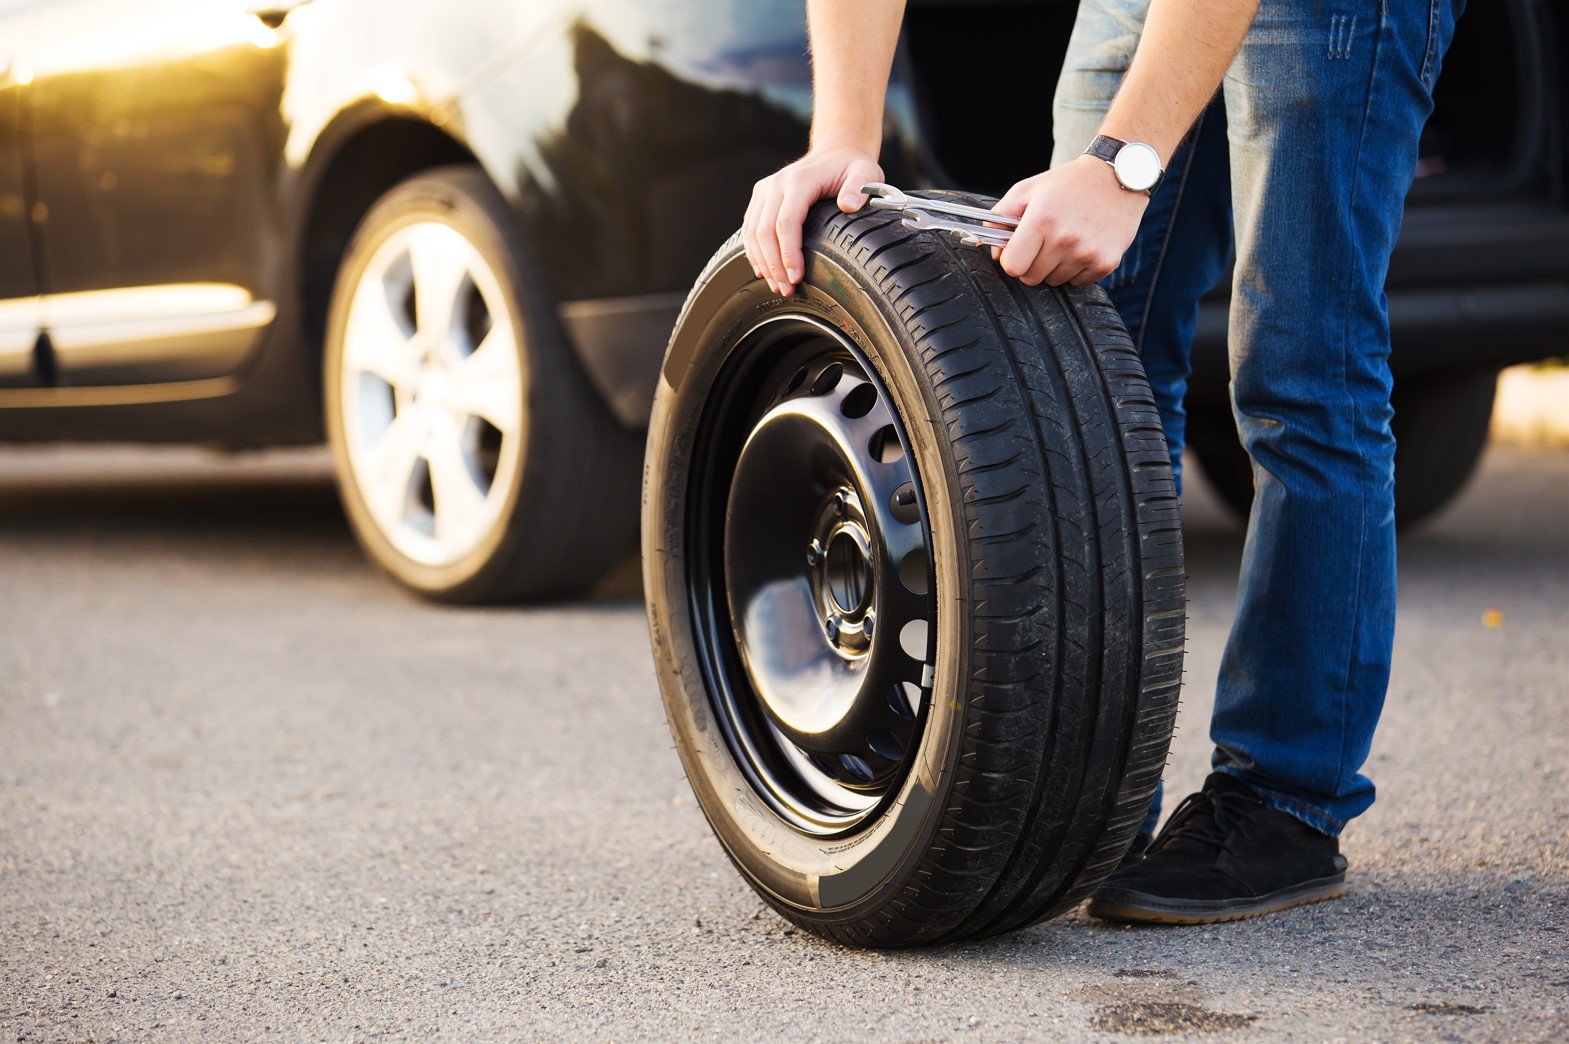 How Long Can You Really Drive On A Spare Tire? - Updated 2021